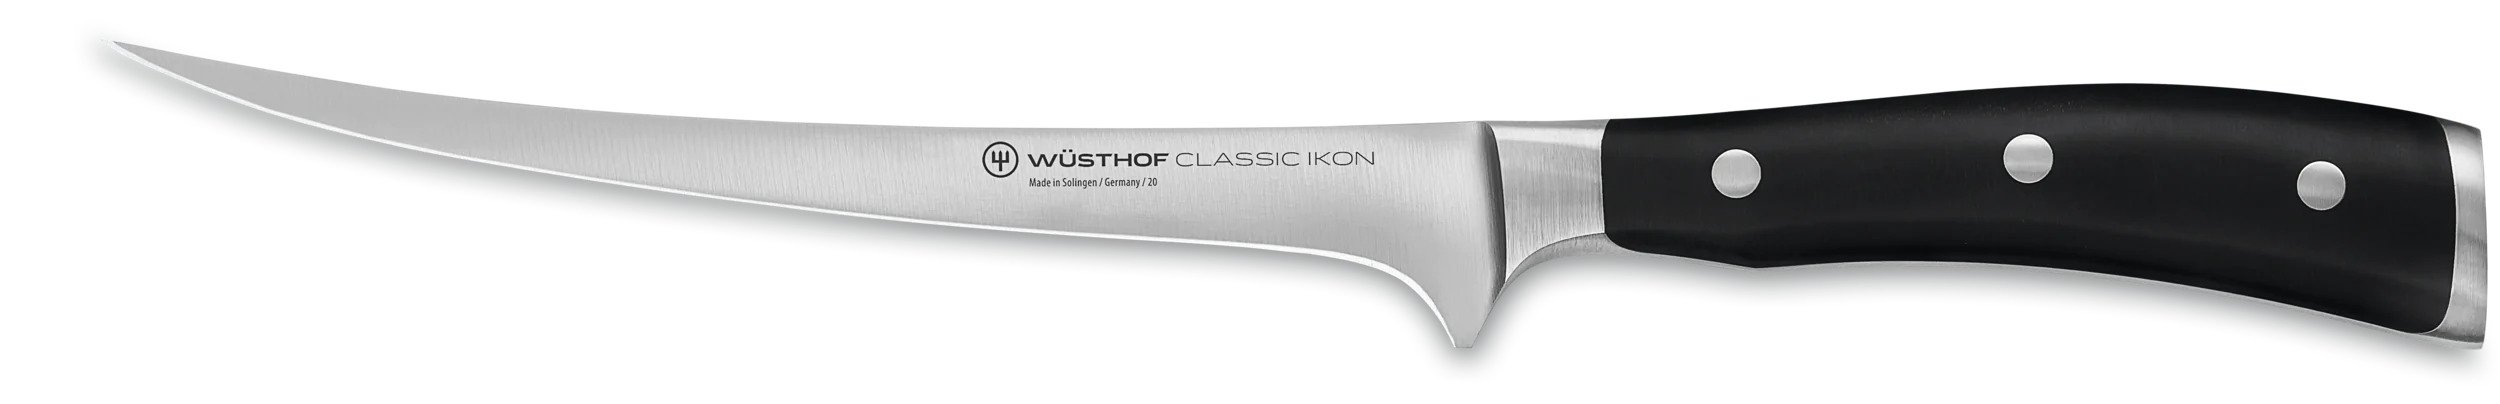 picture of a Wusthof German brand fillet knife